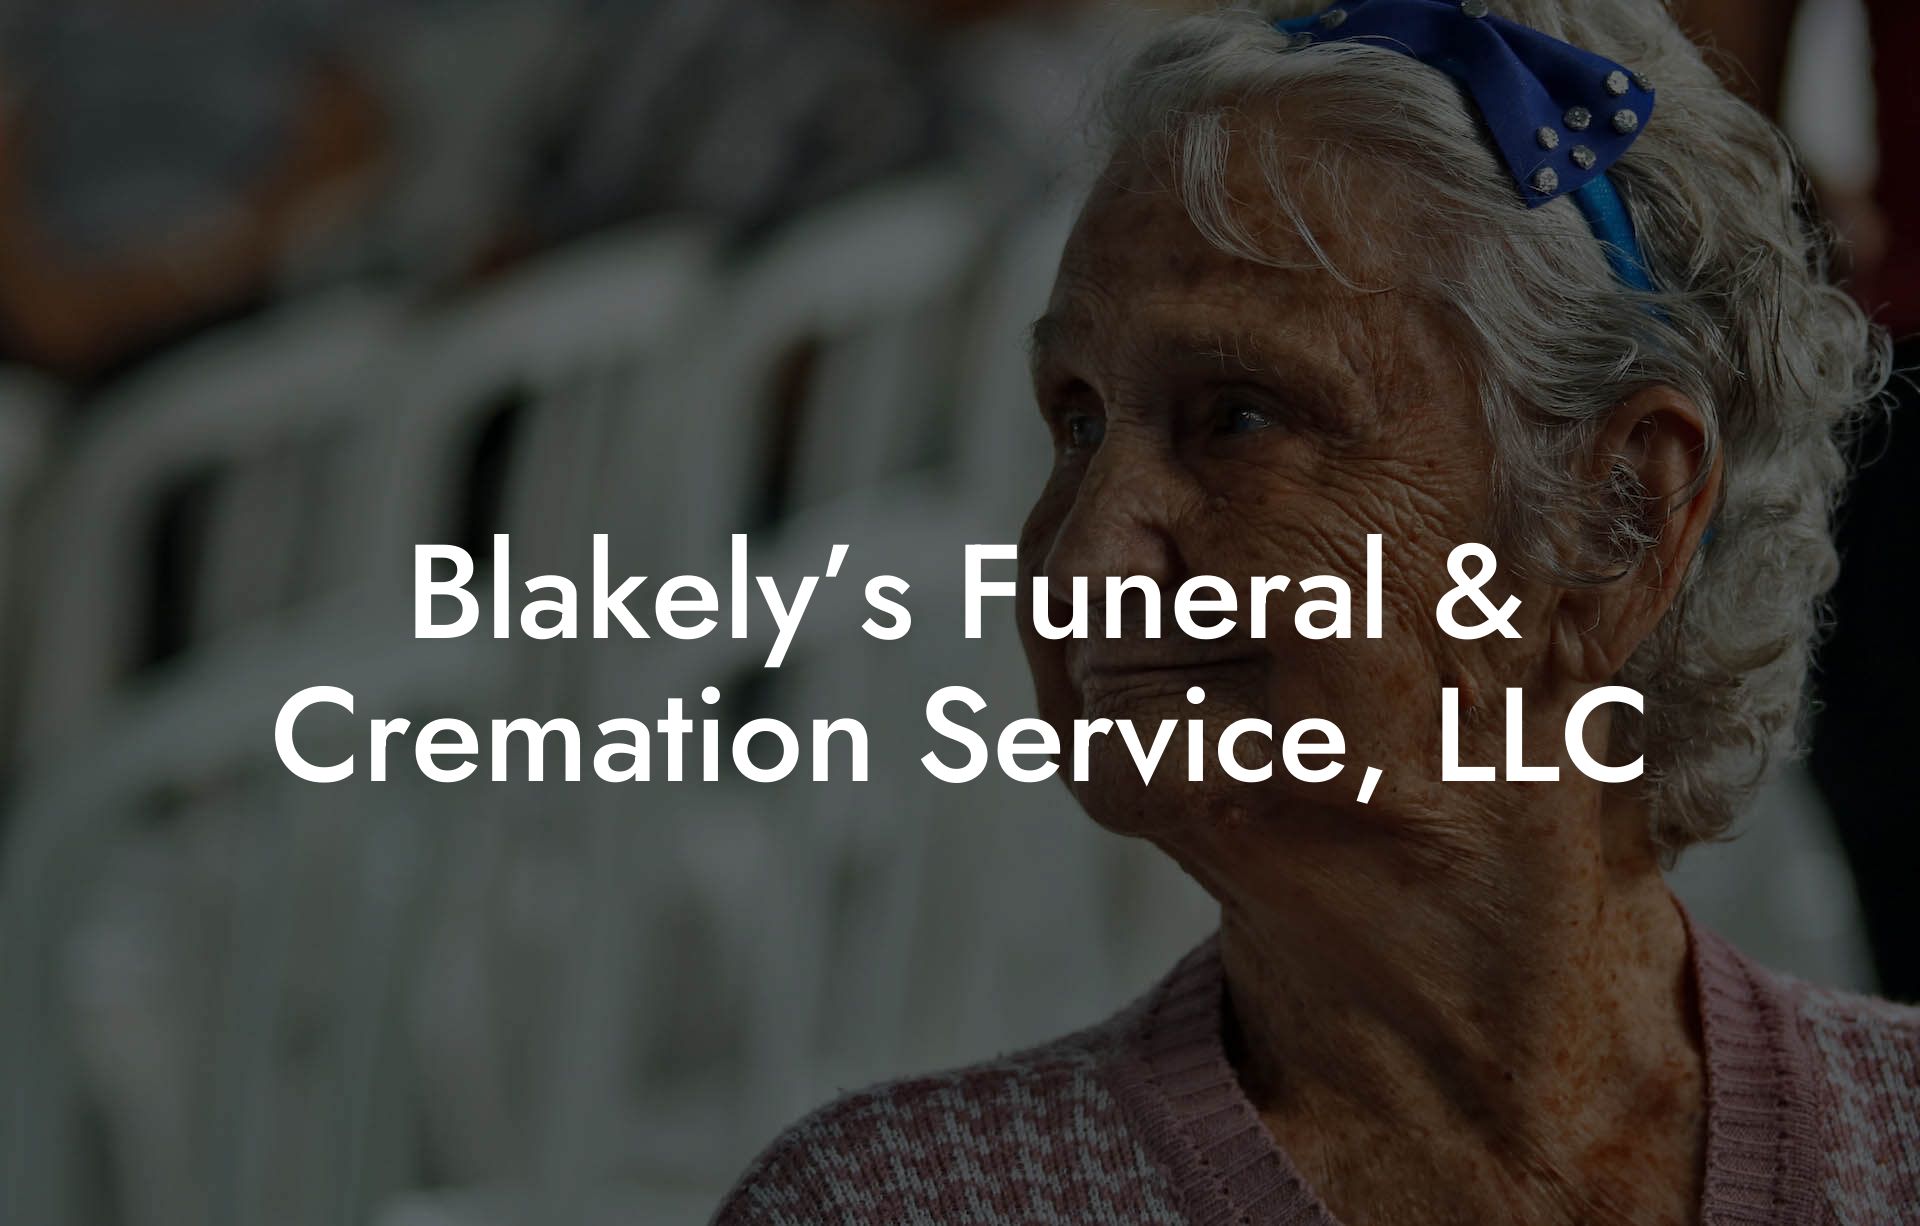 Blakely’s Funeral & Cremation Service, LLC